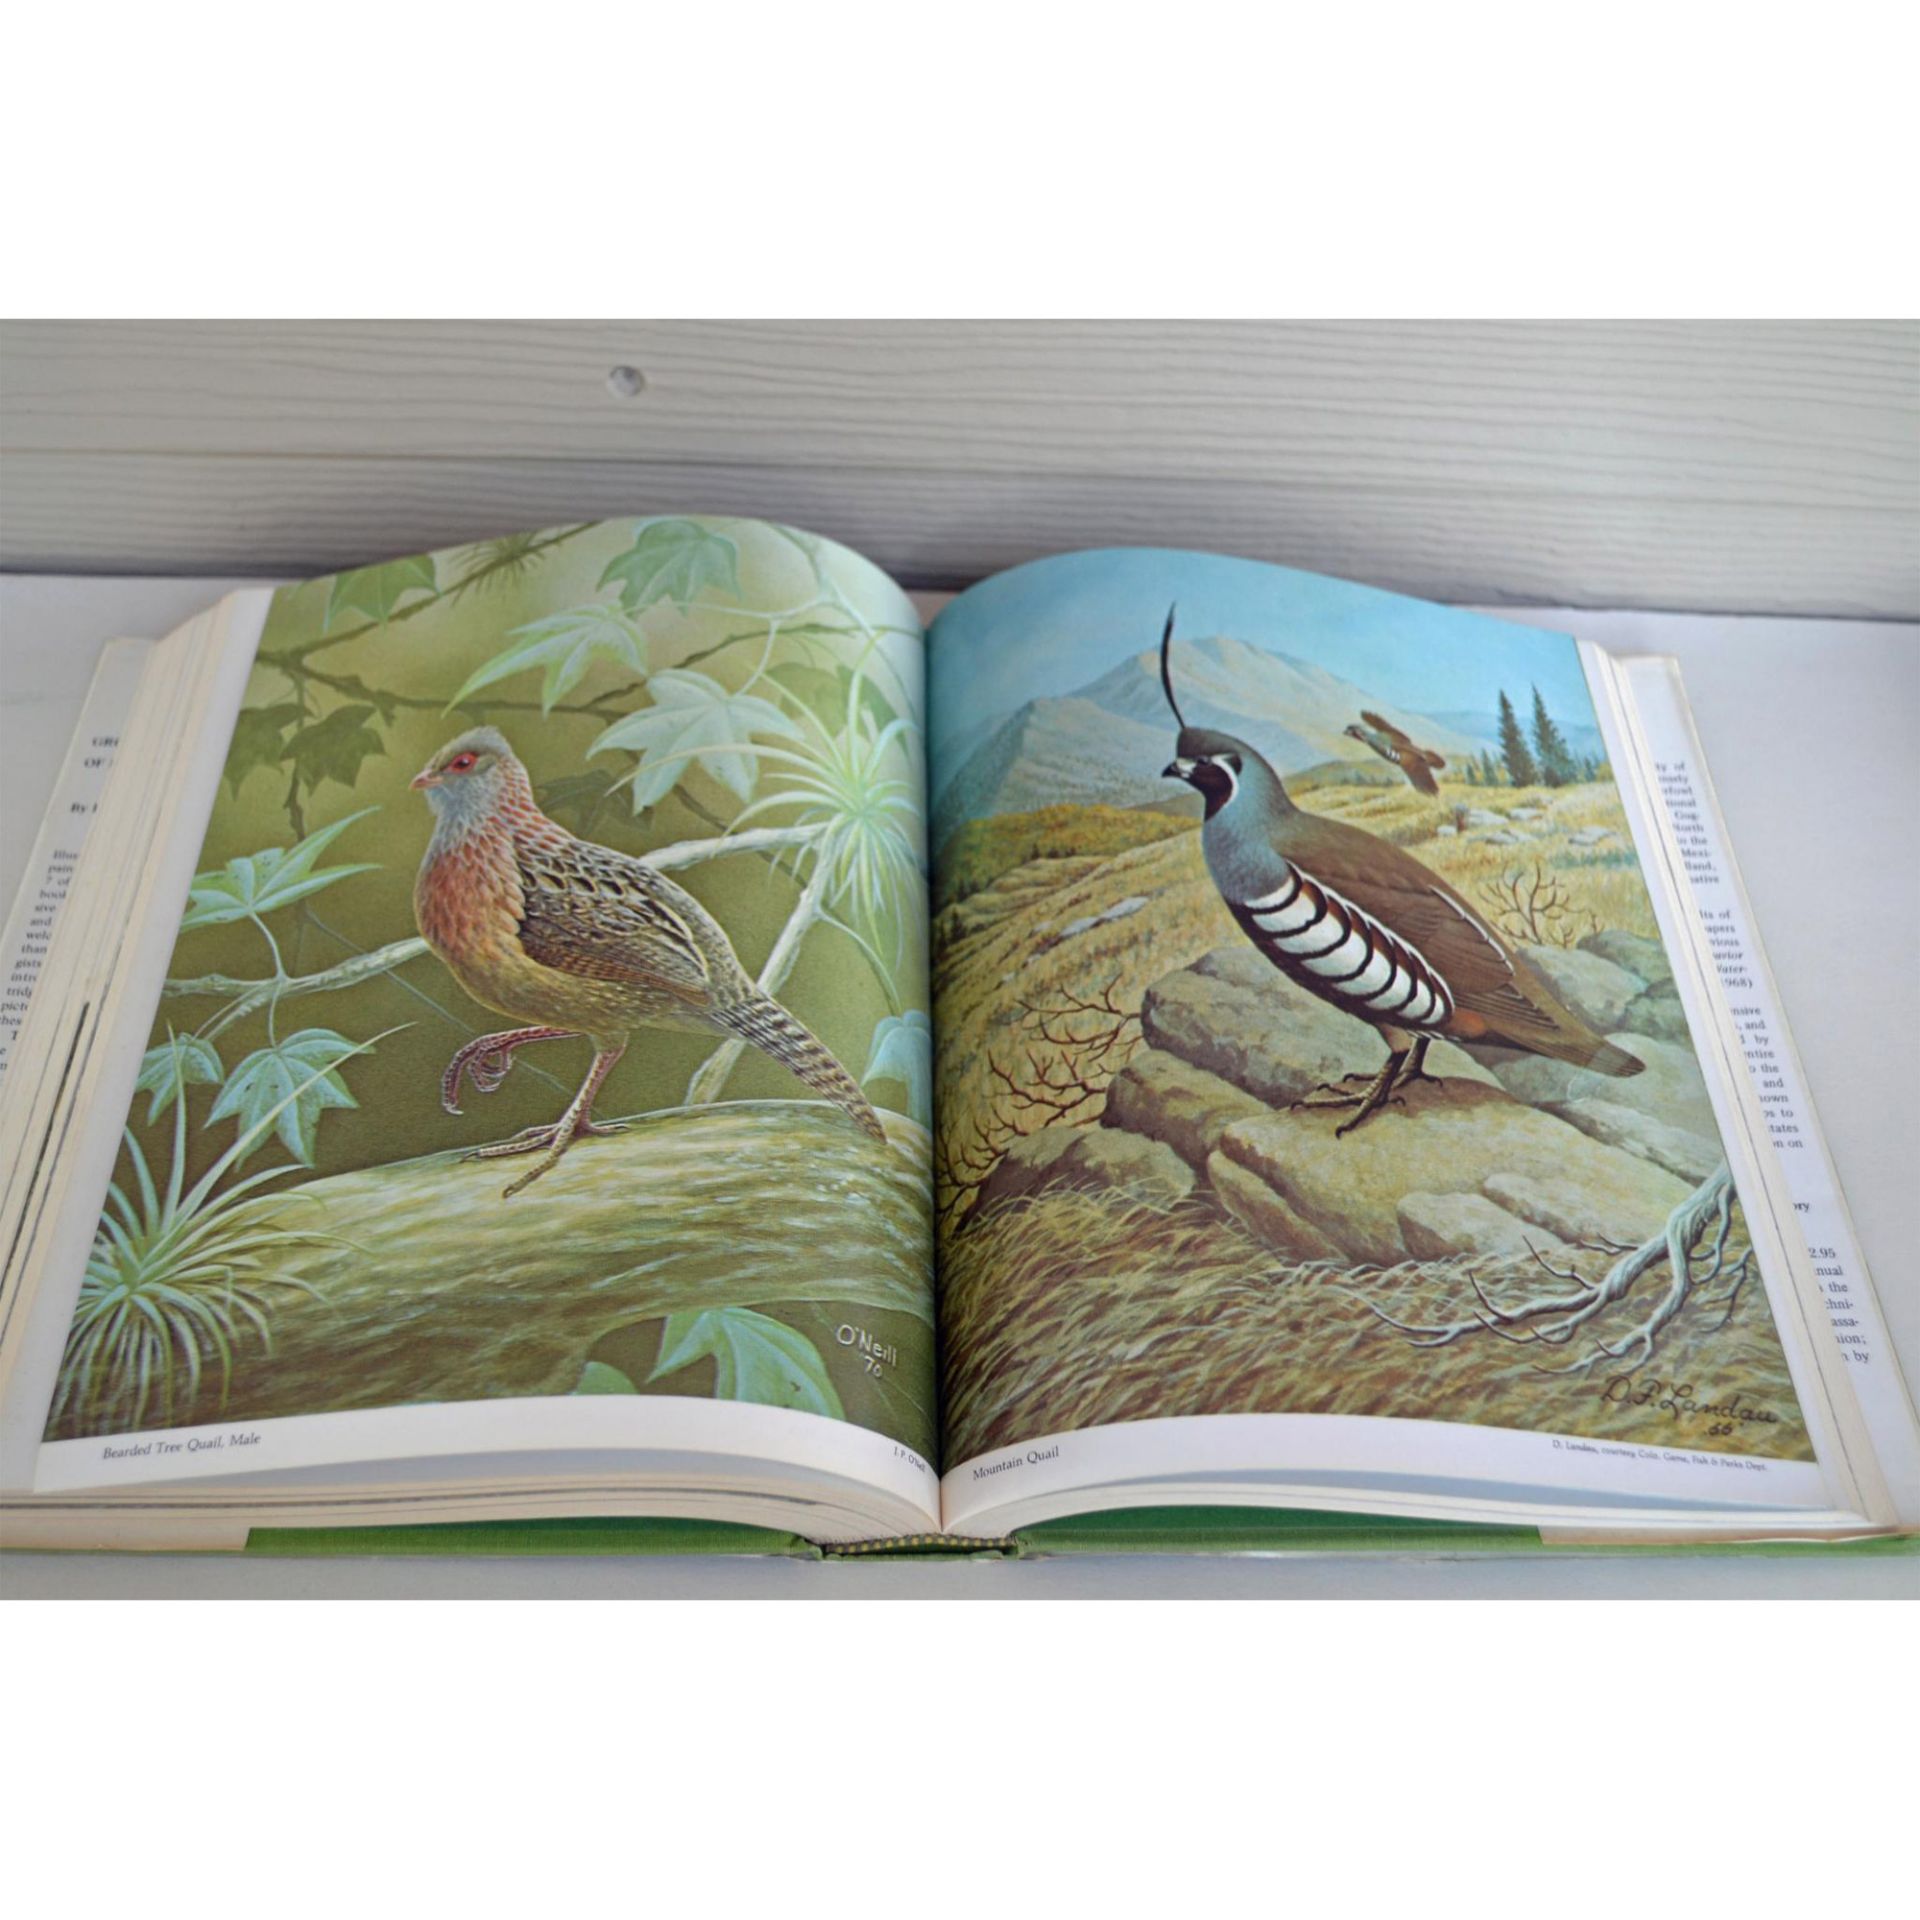 Seven Coffee Table Books, A Collection Of Birds, Animals, The National Audubon Society, The Great Ap - Image 5 of 8